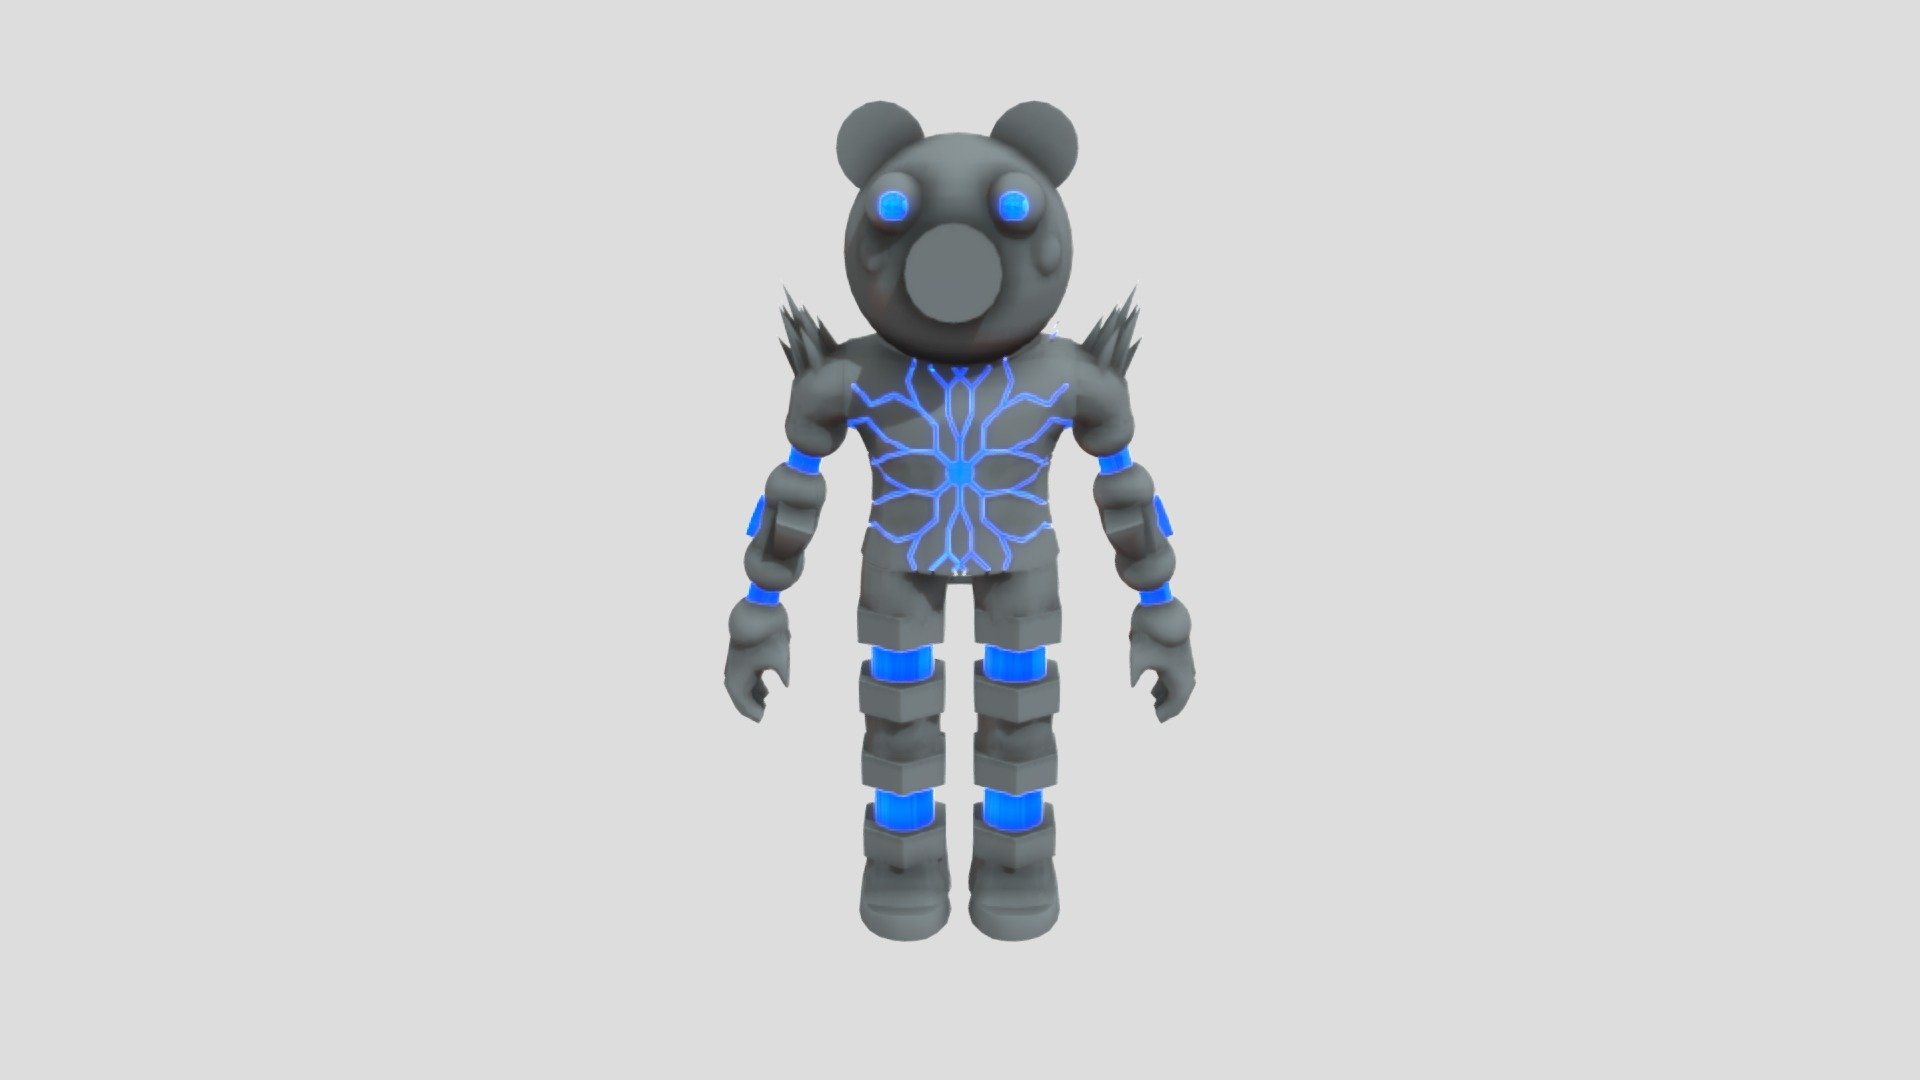 Roblox Piggy Characters [NEW Mousy Skin]